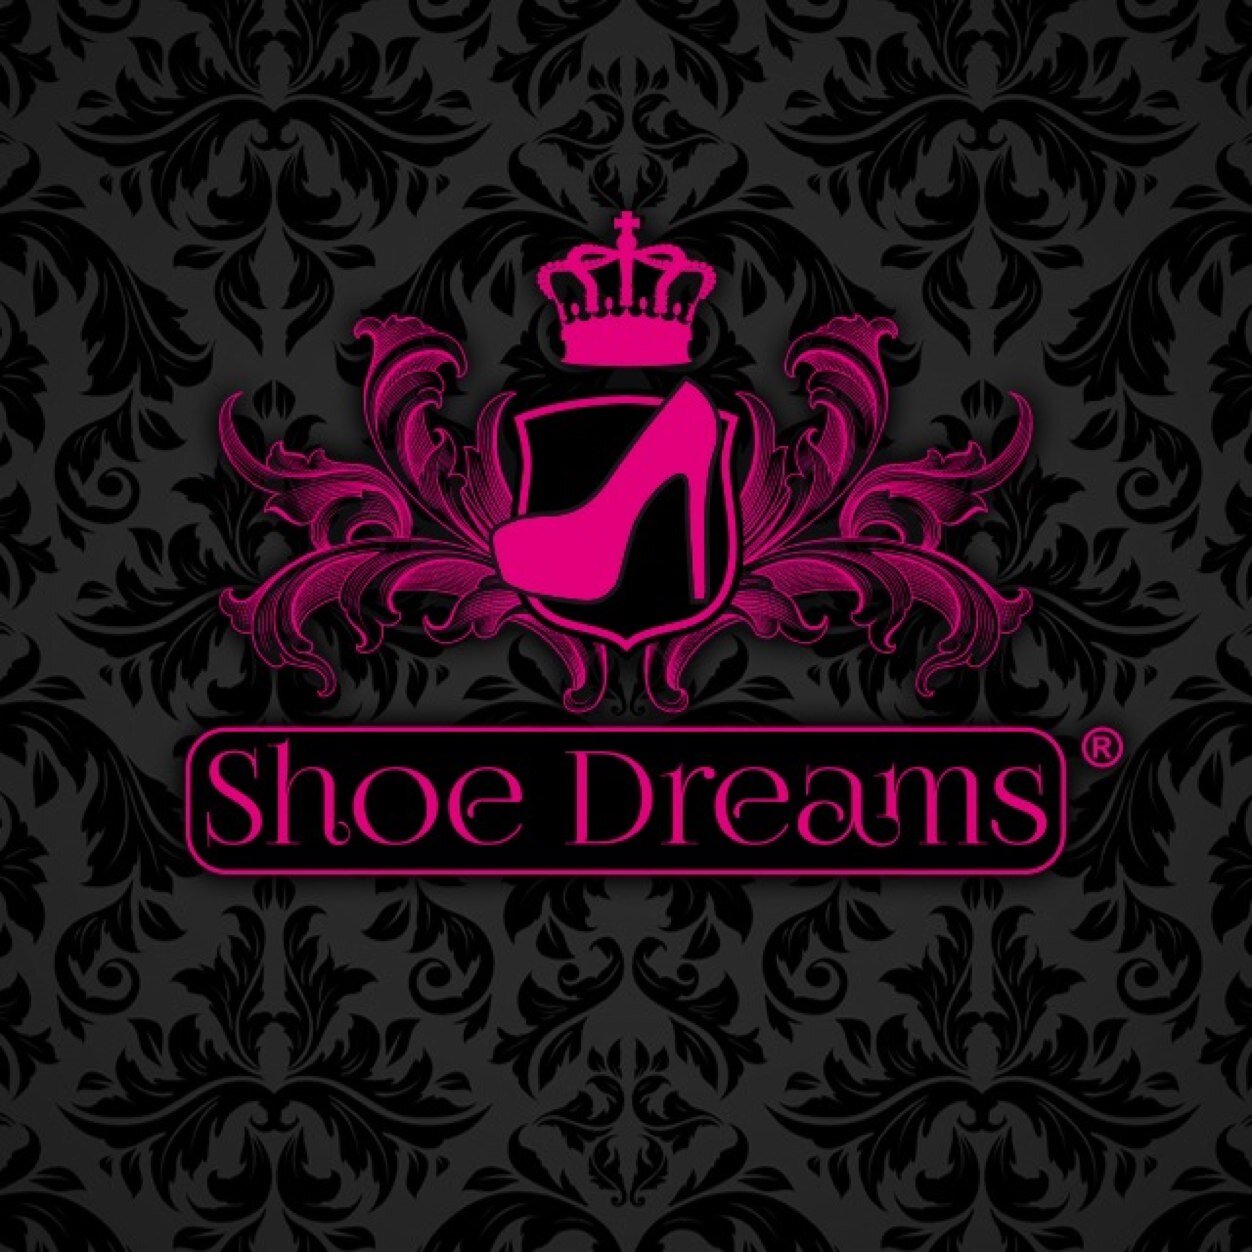 Shoe Dreams is dedicated to the design of seductive and extravagant high heels. Get ready for some hot designs! Now available at http://t.co/ID5U489tlF